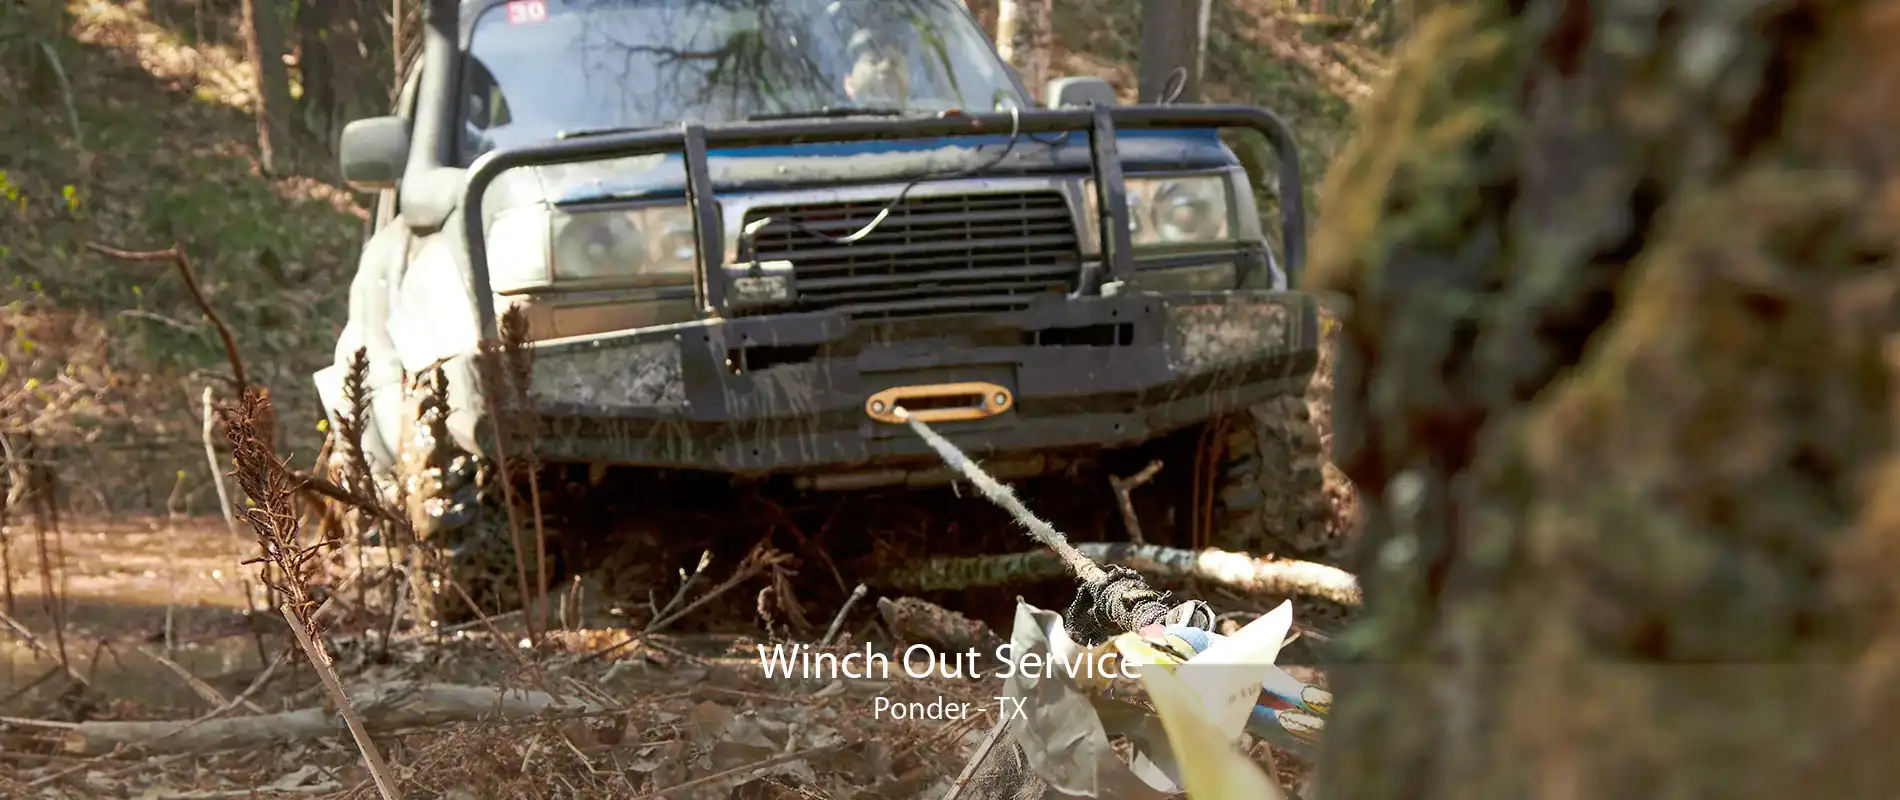 Winch Out Service Ponder - TX